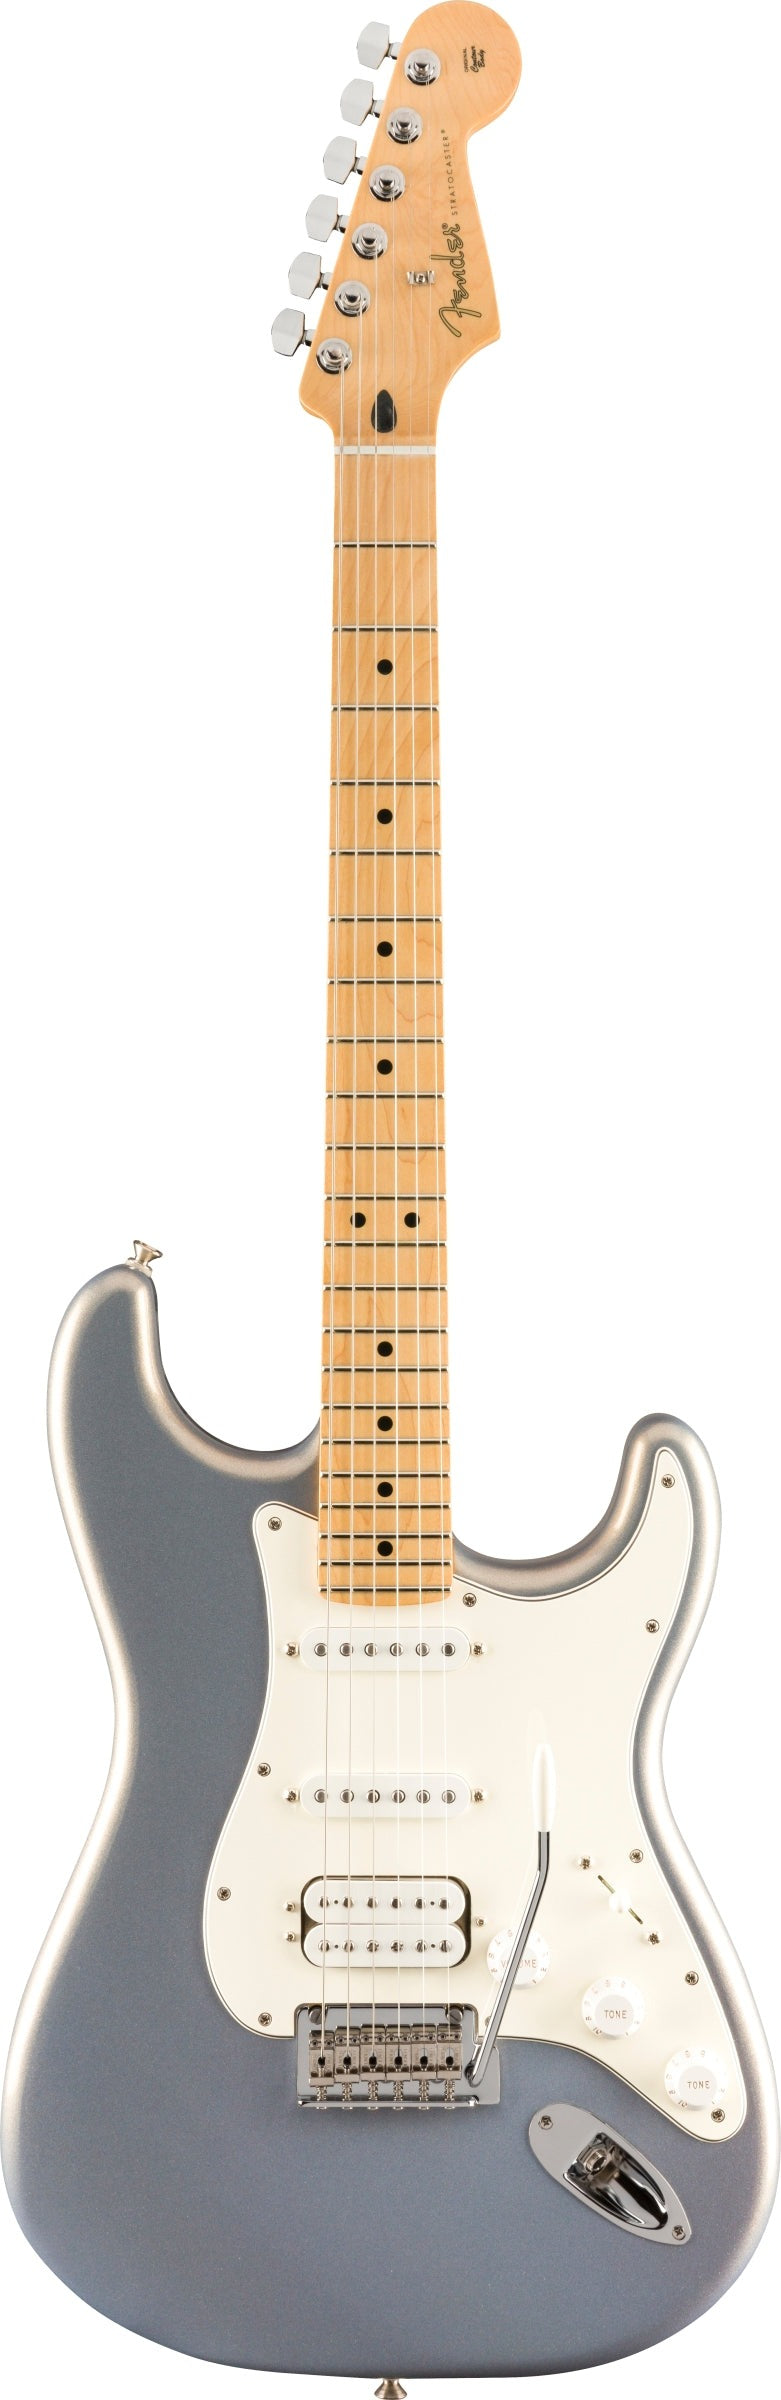 Fender Player Stratocaster Hss Electric Guitar - Silver